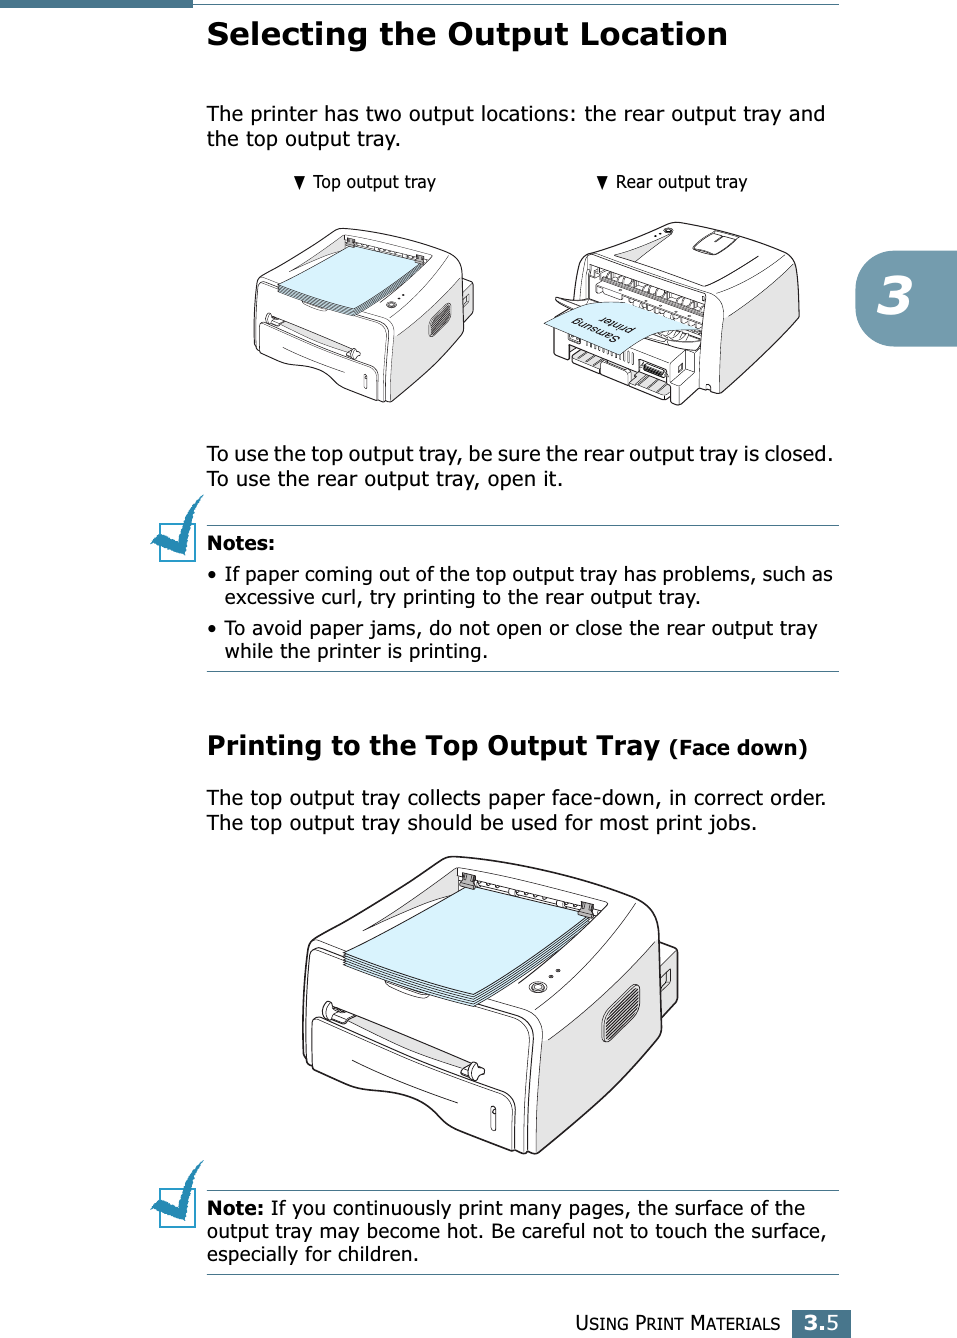 USING PRINT MATERIALS3.53Selecting the Output LocationThe printer has two output locations: the rear output tray and the top output tray. To use the top output tray, be sure the rear output tray is closed. To use the rear output tray, open it.Notes:•If paper coming out of the top output tray has problems, such as excessive curl, try printing to the rear output tray.•To avoid paper jams, do not open or close the rear output tray while the printer is printing.Printing to the Top Output Tray (Face down)The top output tray collects paper face-down, in correct order. The top output tray should be used for most print jobs.Note: If you continuously print many pages, the surface of the output tray may become hot. Be careful not to touch the surface, especially for children.❷ Top output tray ❷ Rear output tray